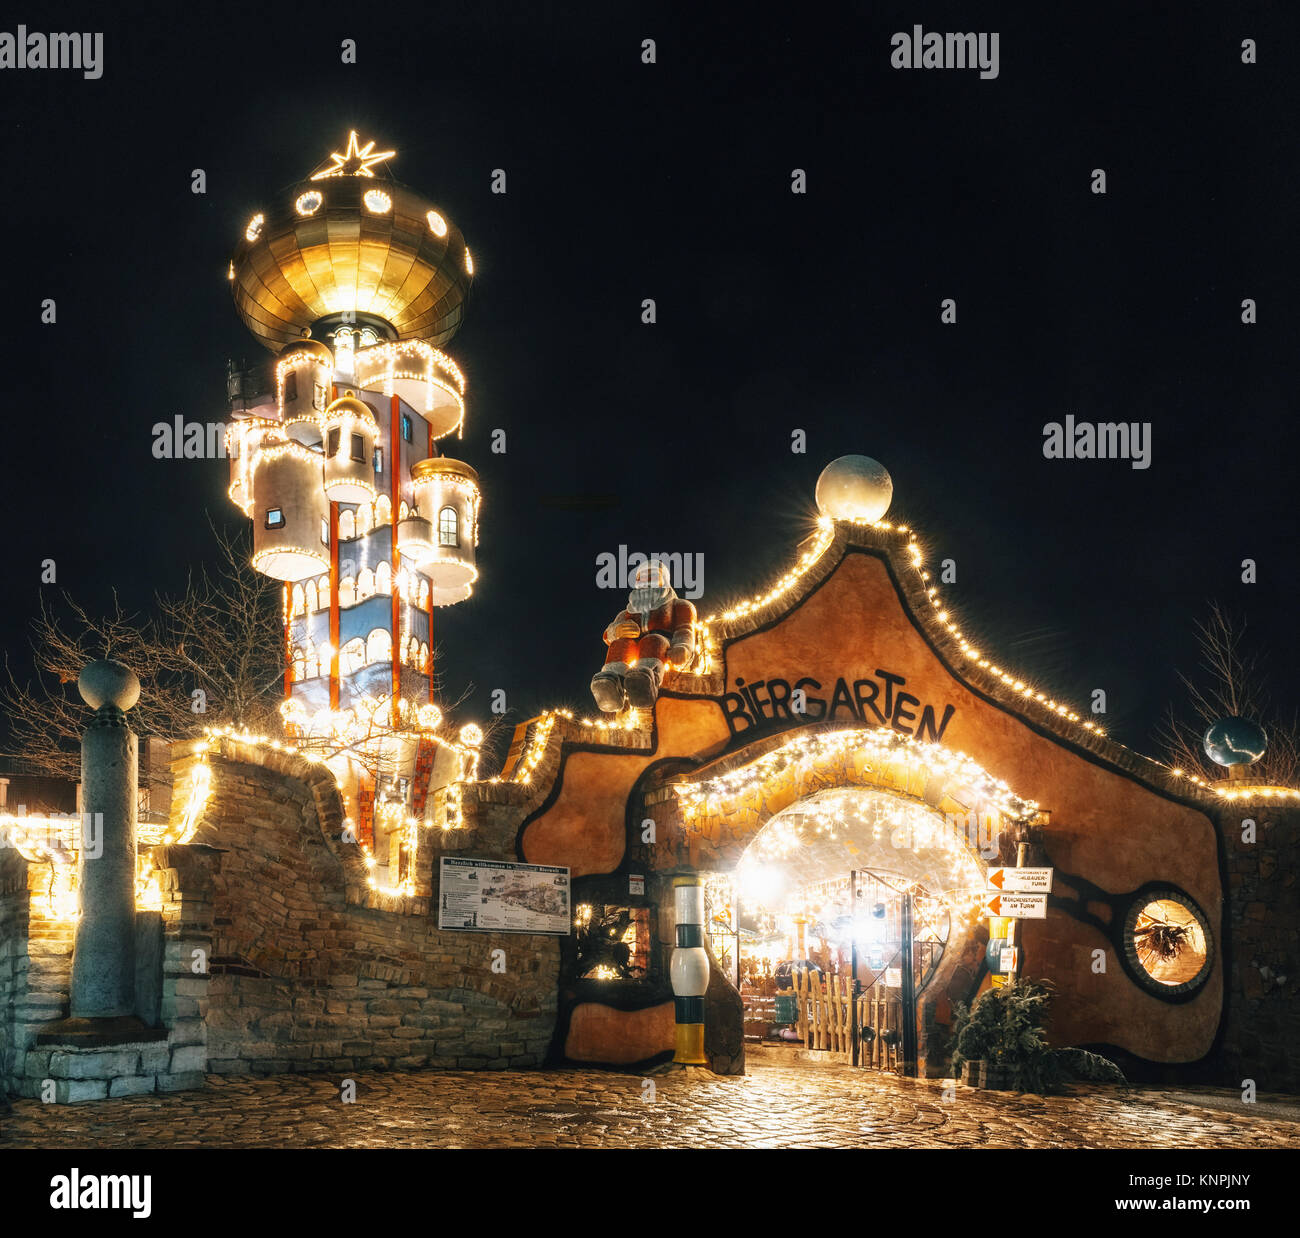 Abensberg, Germany - December 8, 2017: The tower of Kuchlbauers Beer World with Christmas illuminations and loads of shining decoration merchandise. Stock Photo